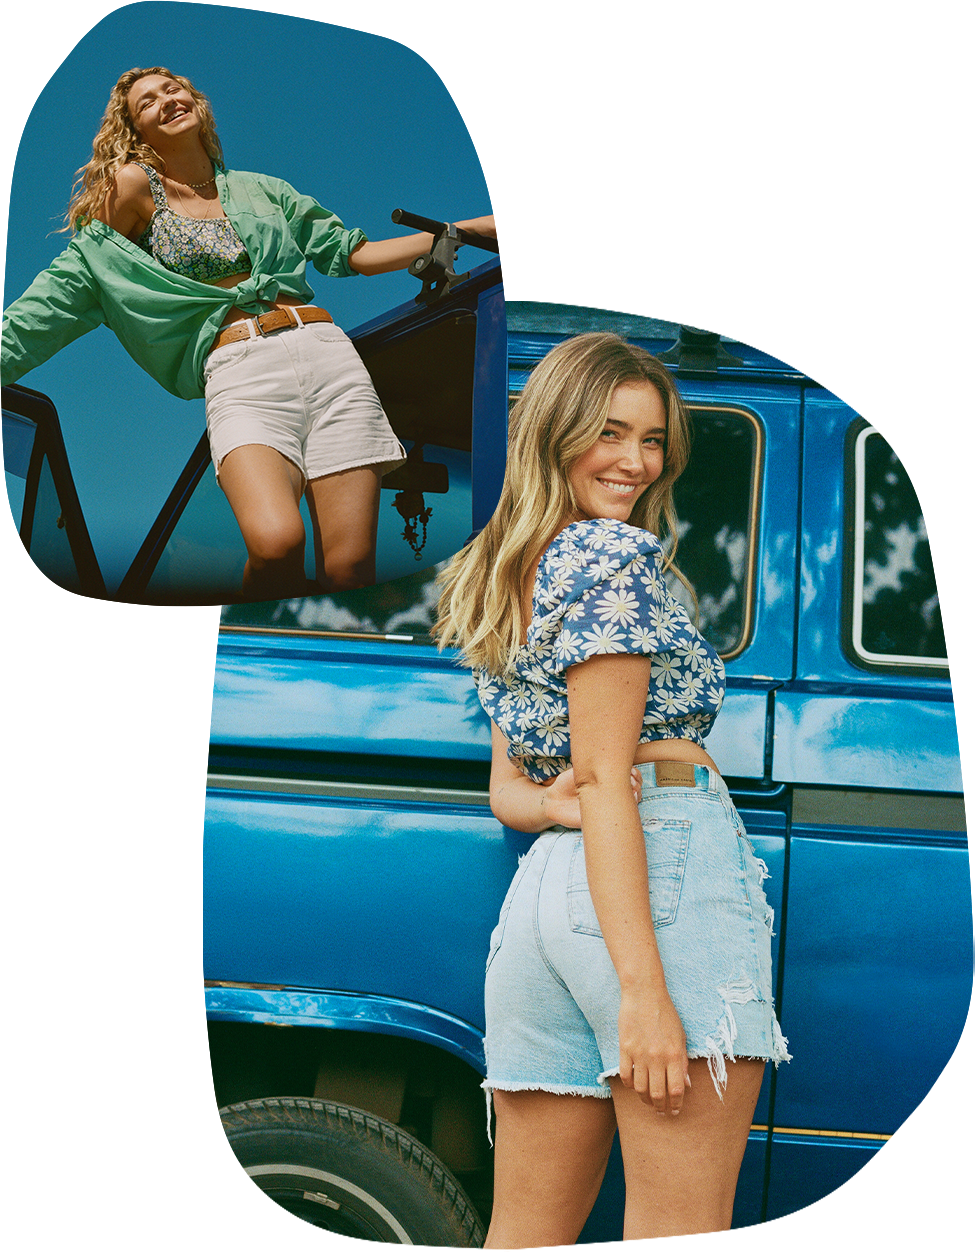 two images, first is of girl in white shorts with a blue tank top and green long sleeve button up top, second is girl in denim shorts and floral cropped top